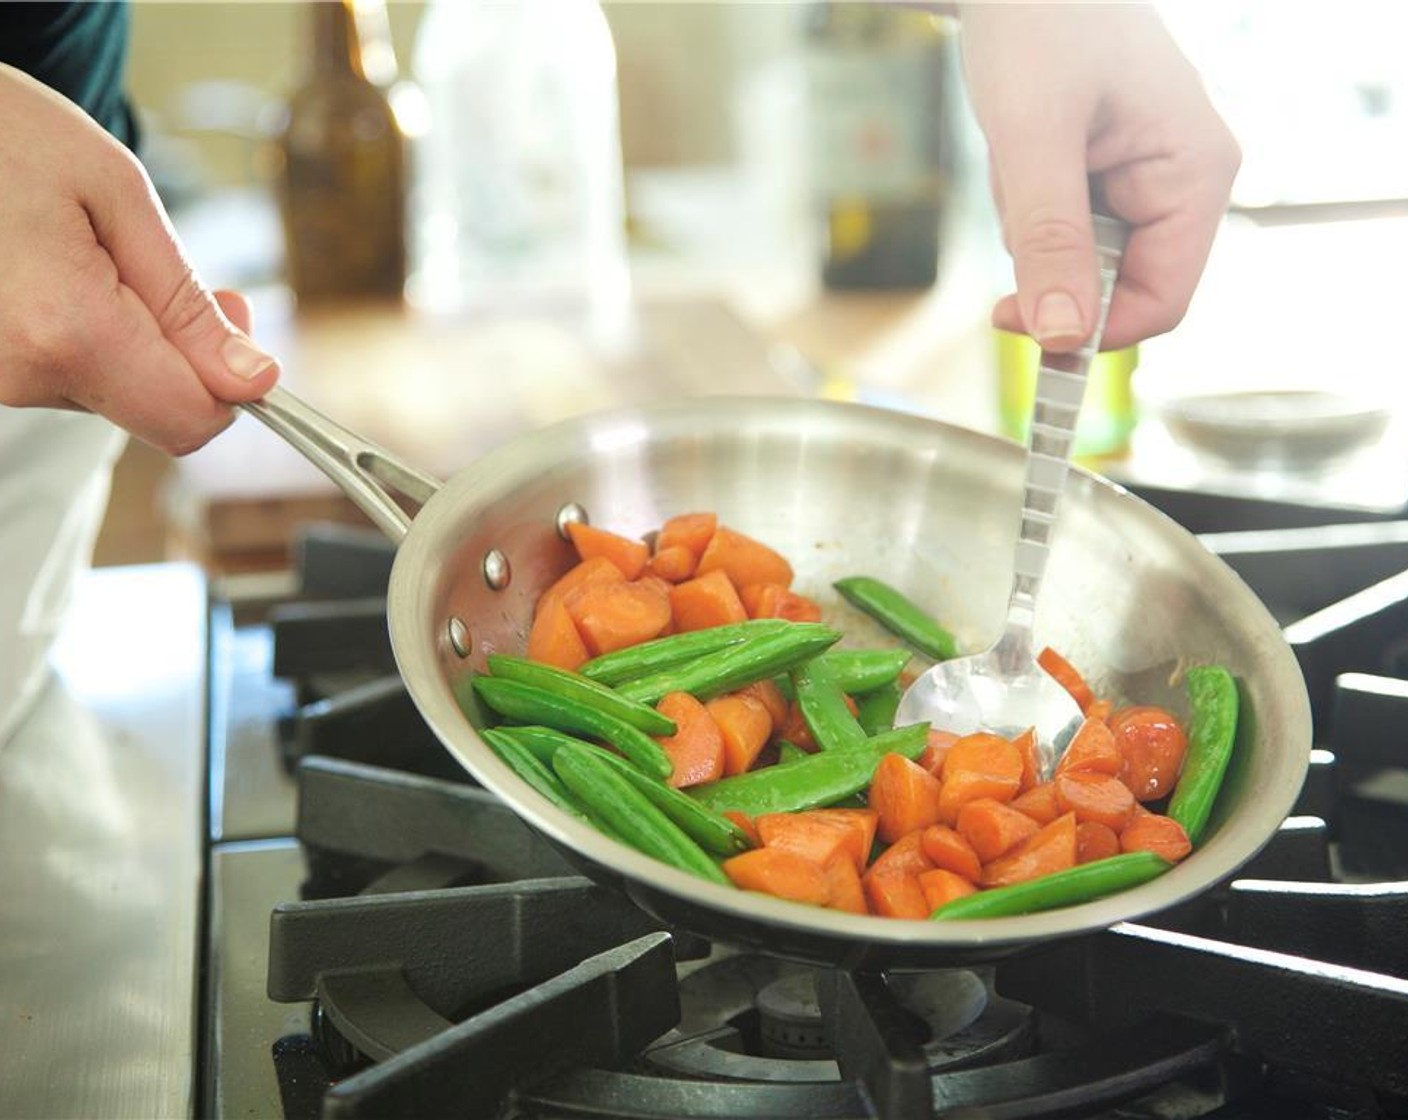 step 11 Heat the same small saute pan over medium heat with Olive Oil (1 Tbsp). When oil is hot, add carrots and snap peas to pan and stir until vegetables are cooked, about four minutes.